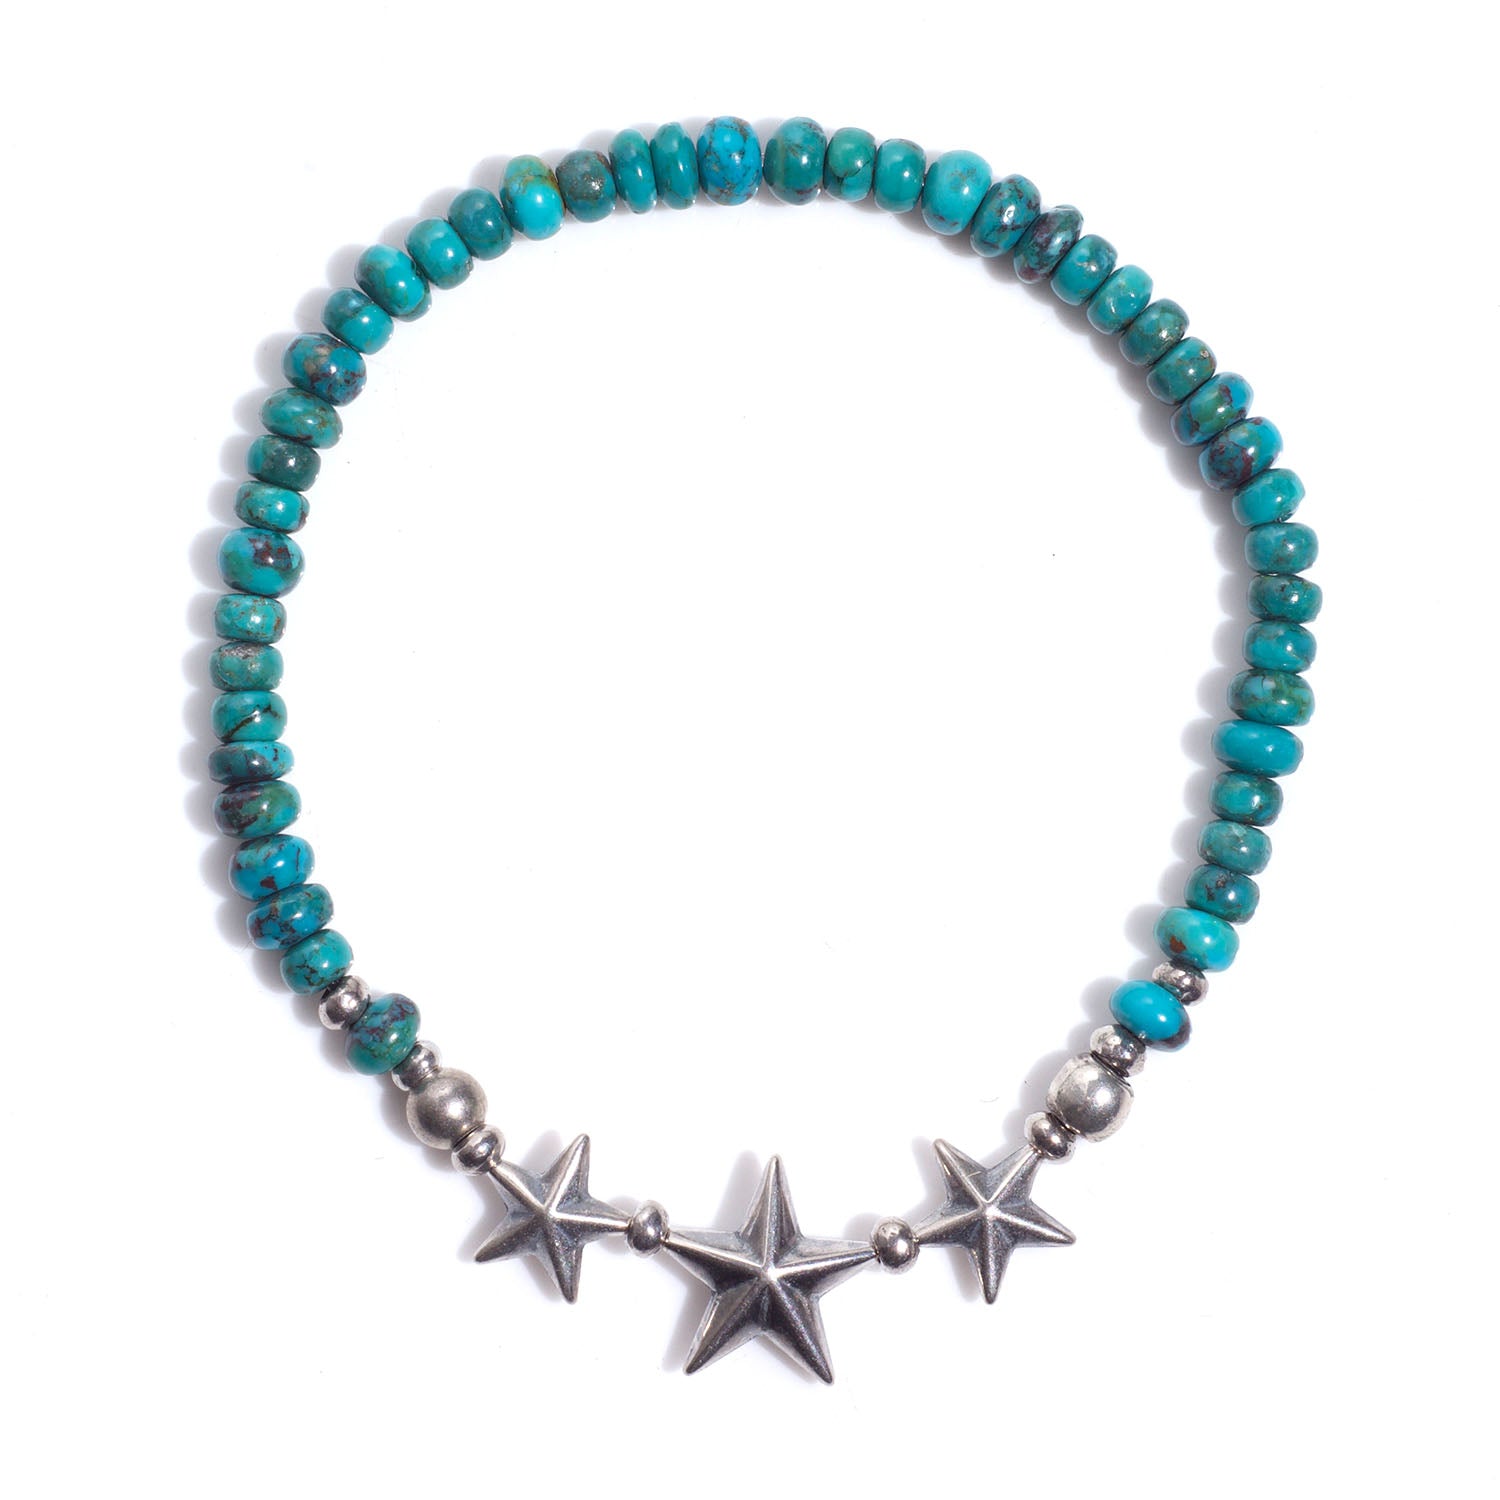 Star Beads Bracelet - Turquoise Beads - May club